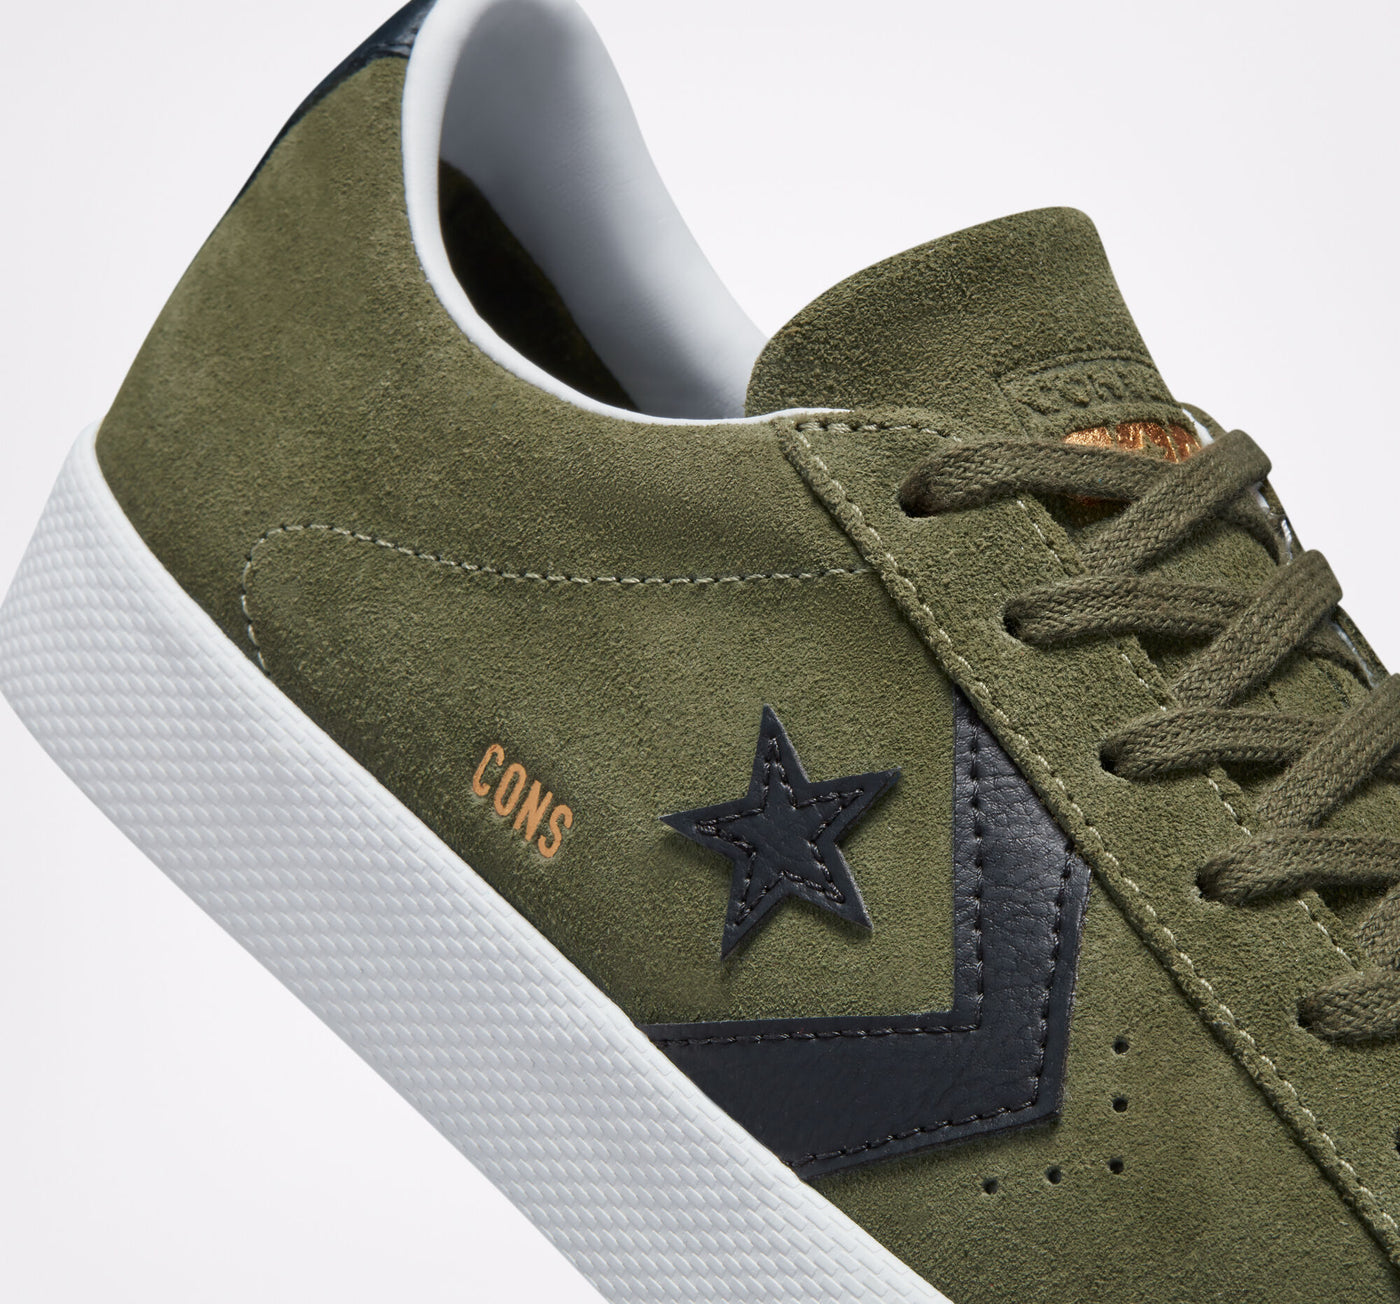 Converse Cons - Pro Leather Utility Green/Black/White